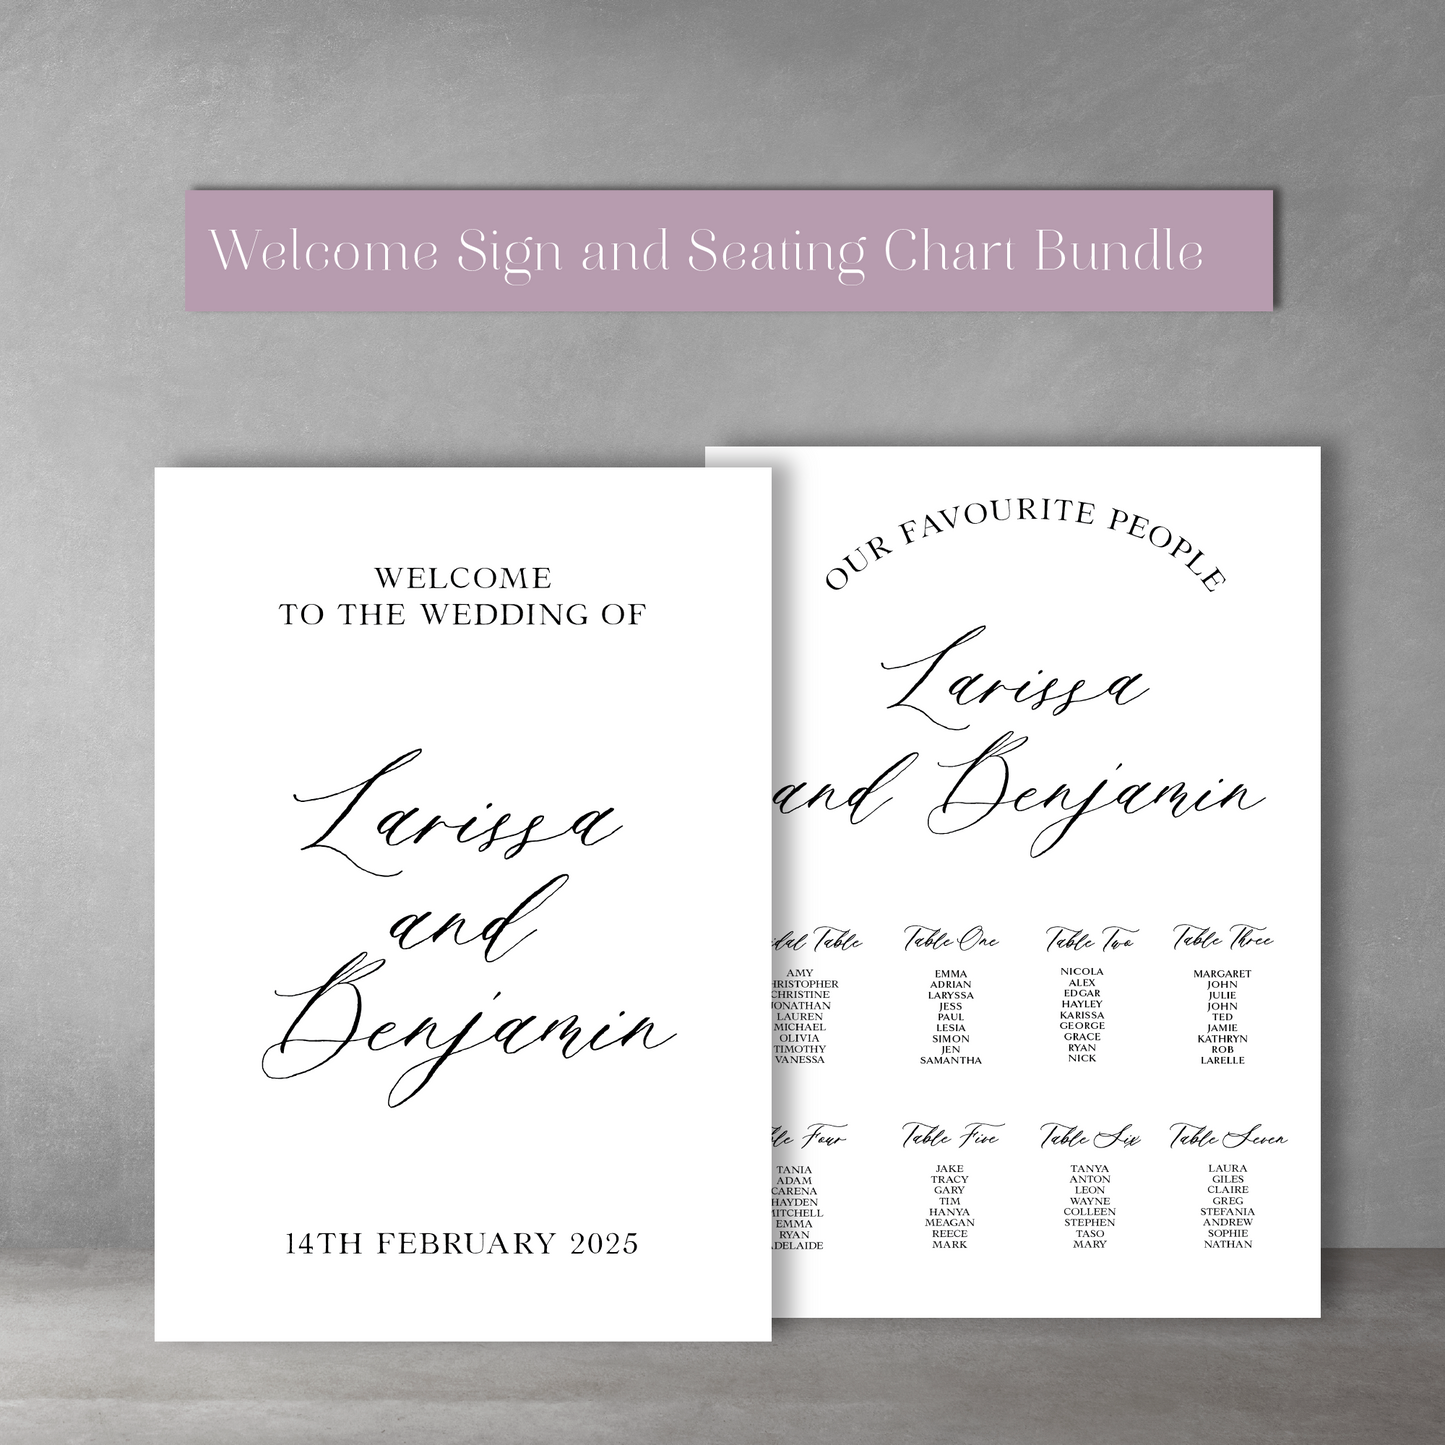 Larissa Wedding Welcome Sign and Seating Chart Package